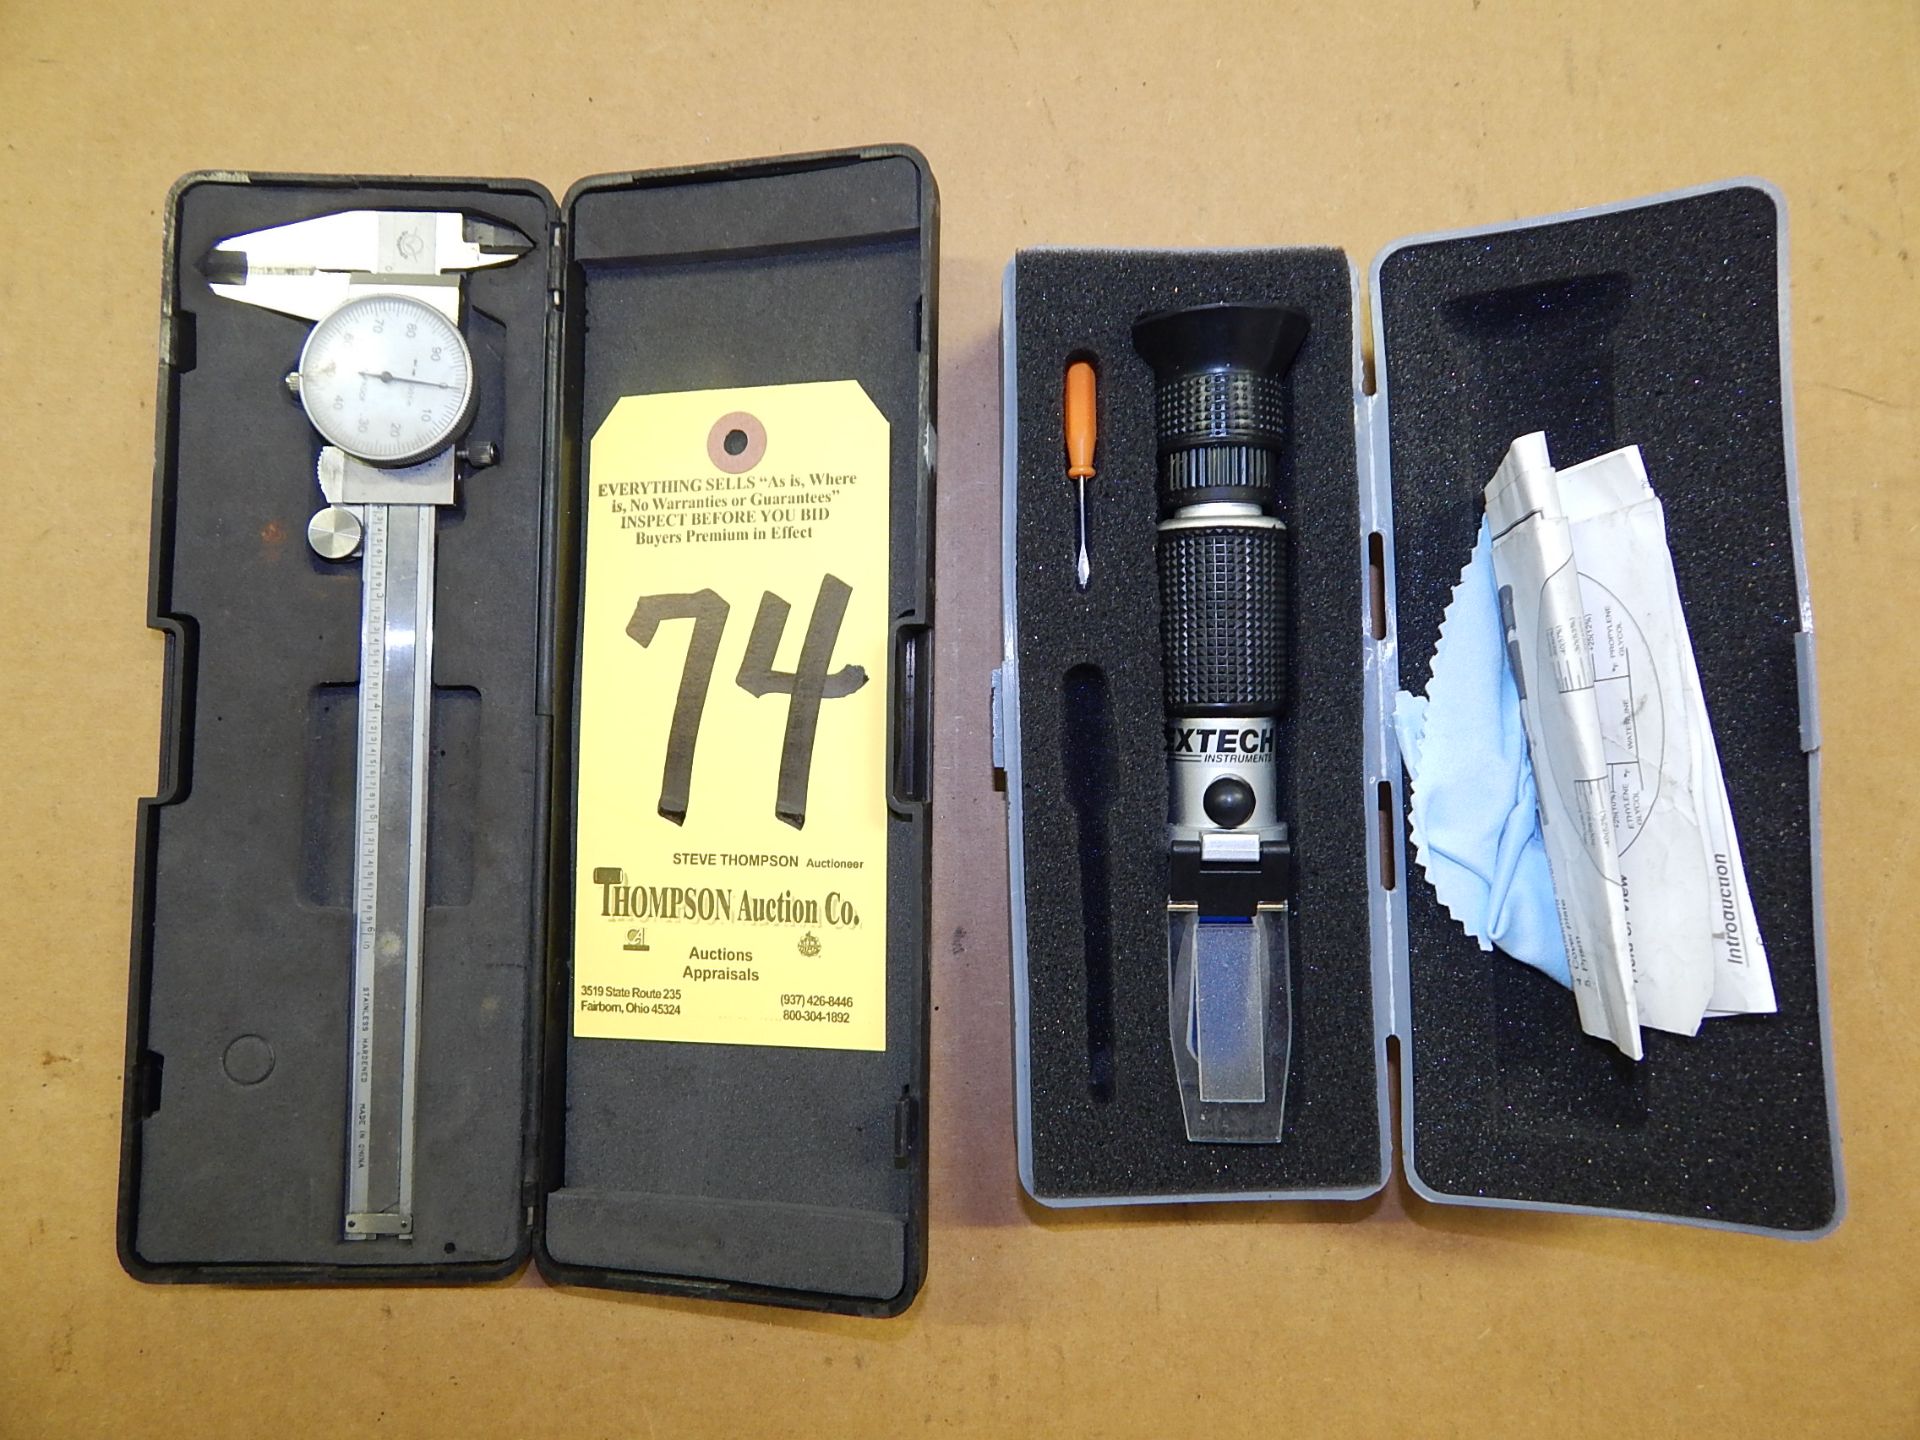 Extech Portable Refractometer and 6" Dial Caliper